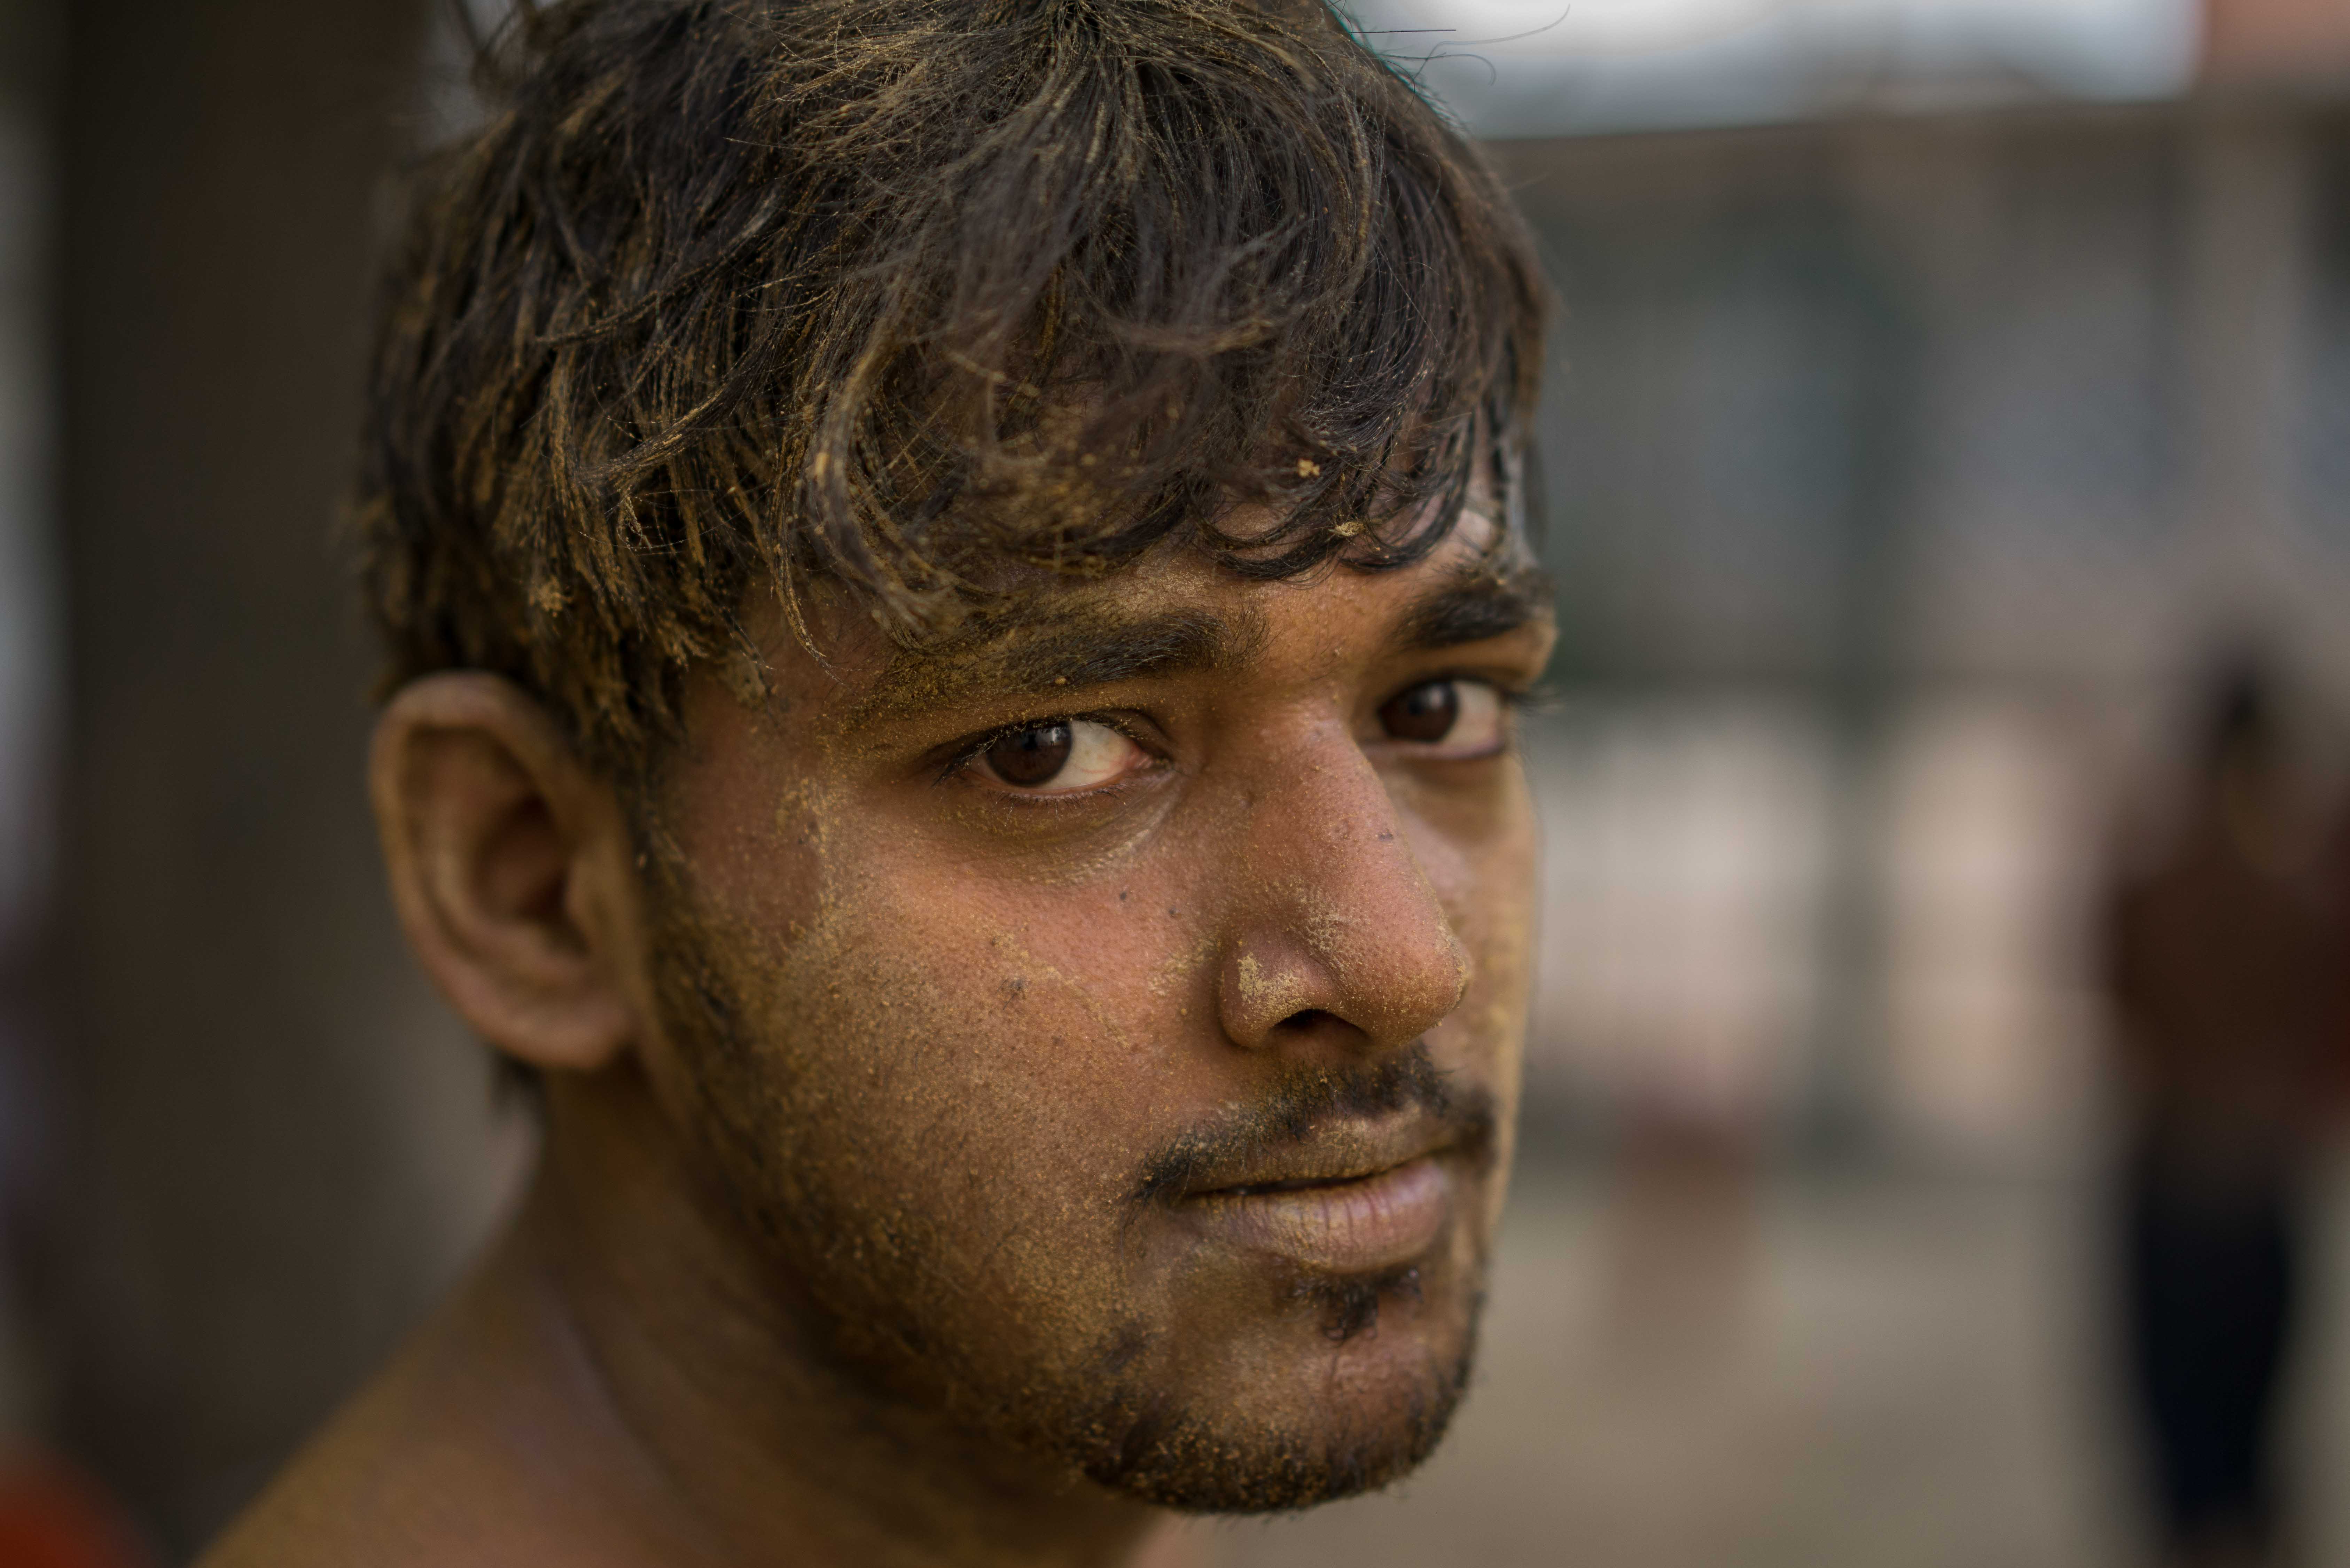 A young Kushti wrestler covered in dirt reflects on a tough training session.